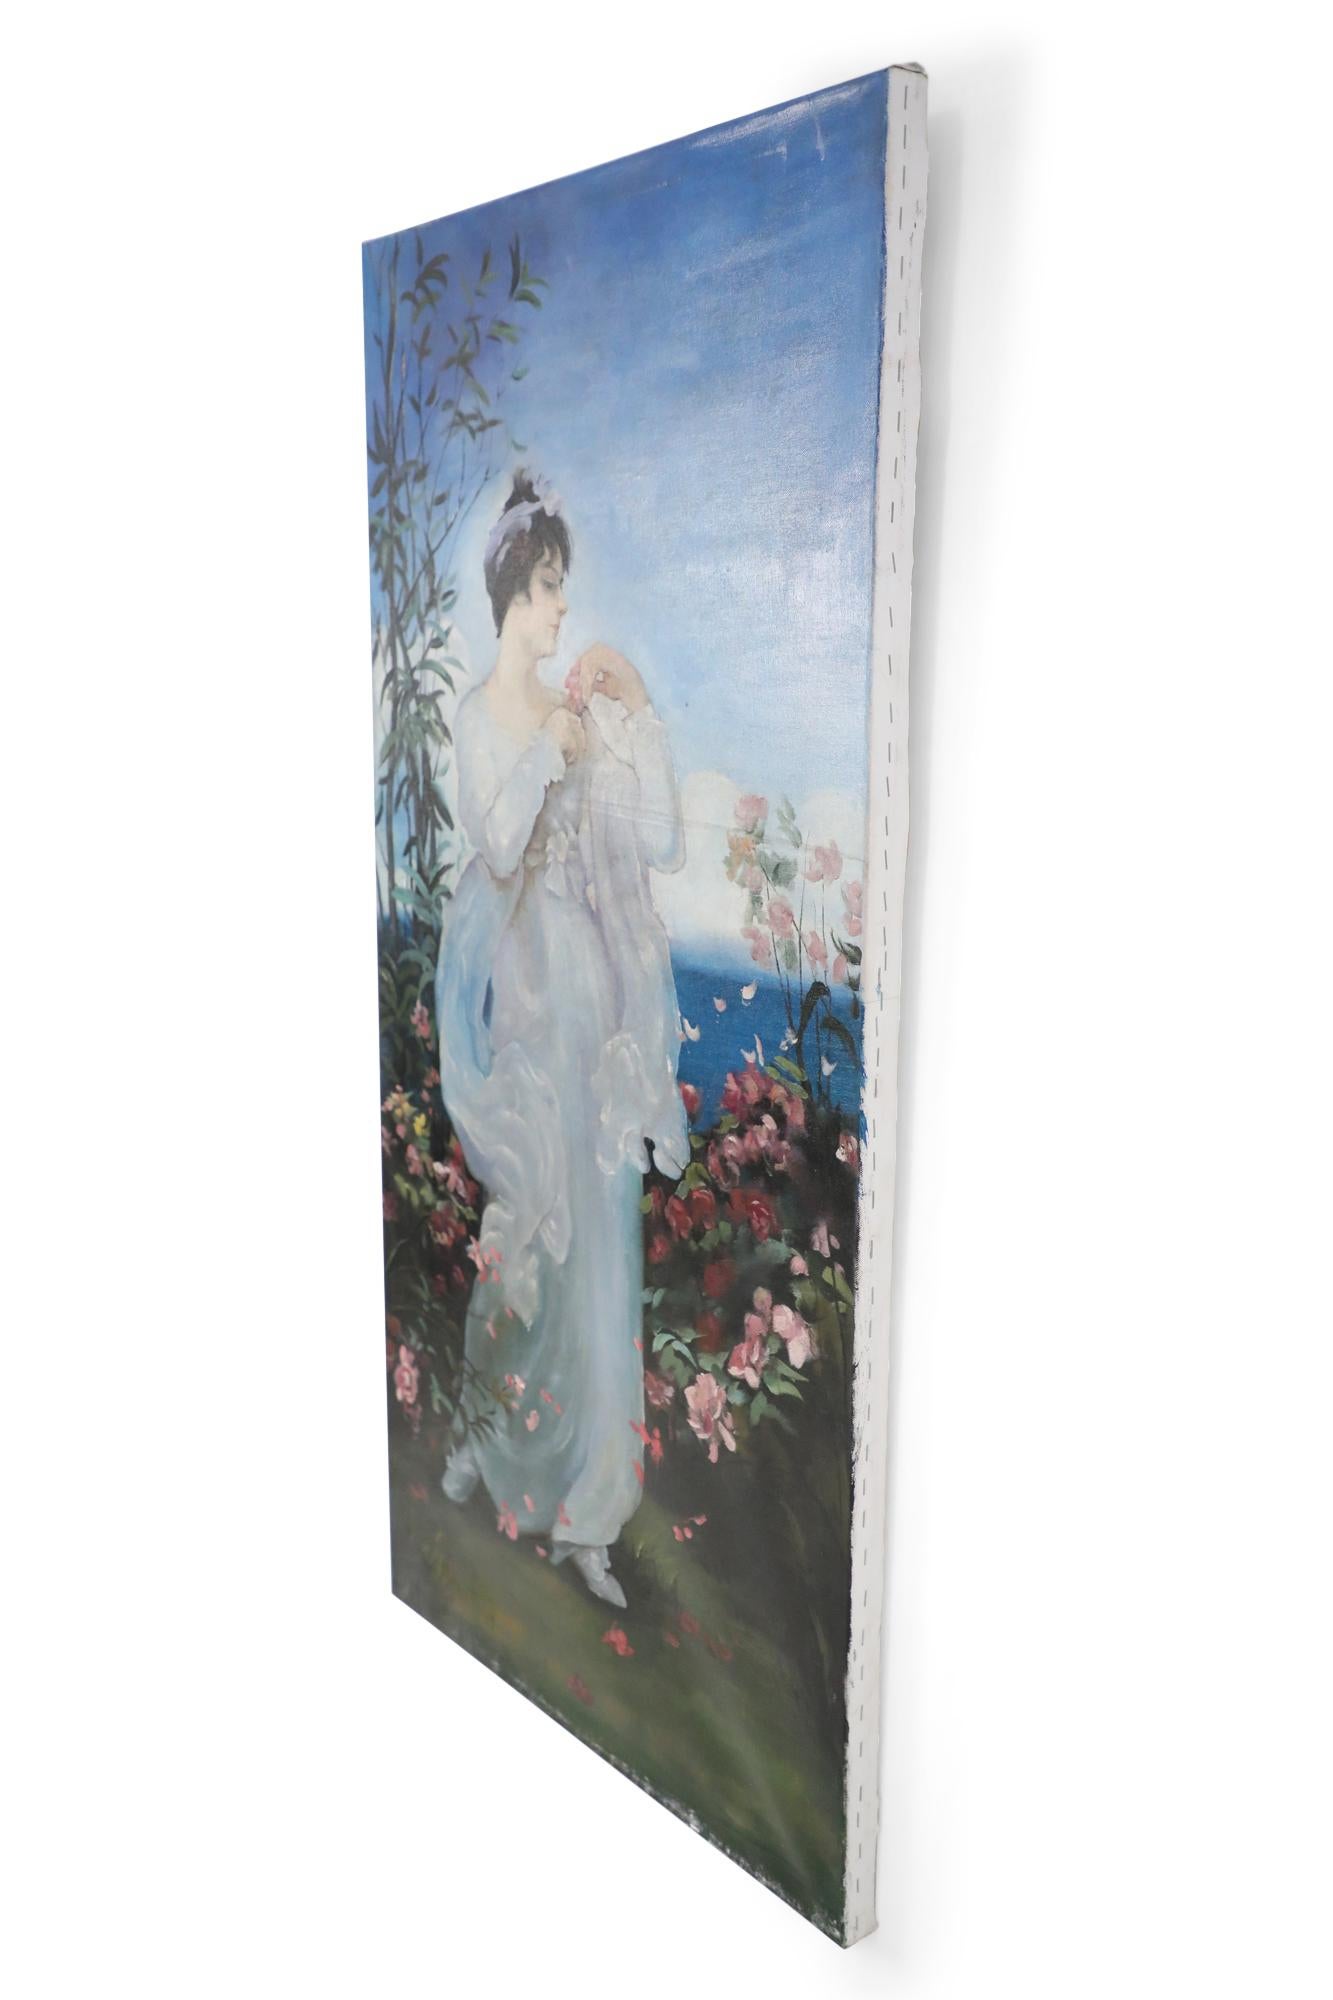 Vintage Neoclassical-style (20th Century) oil painting capturing a woman in a billowing white dress standing in a garden brimming with pink roses, with sea and sky in distant view. Painted on unframed canvas.
   